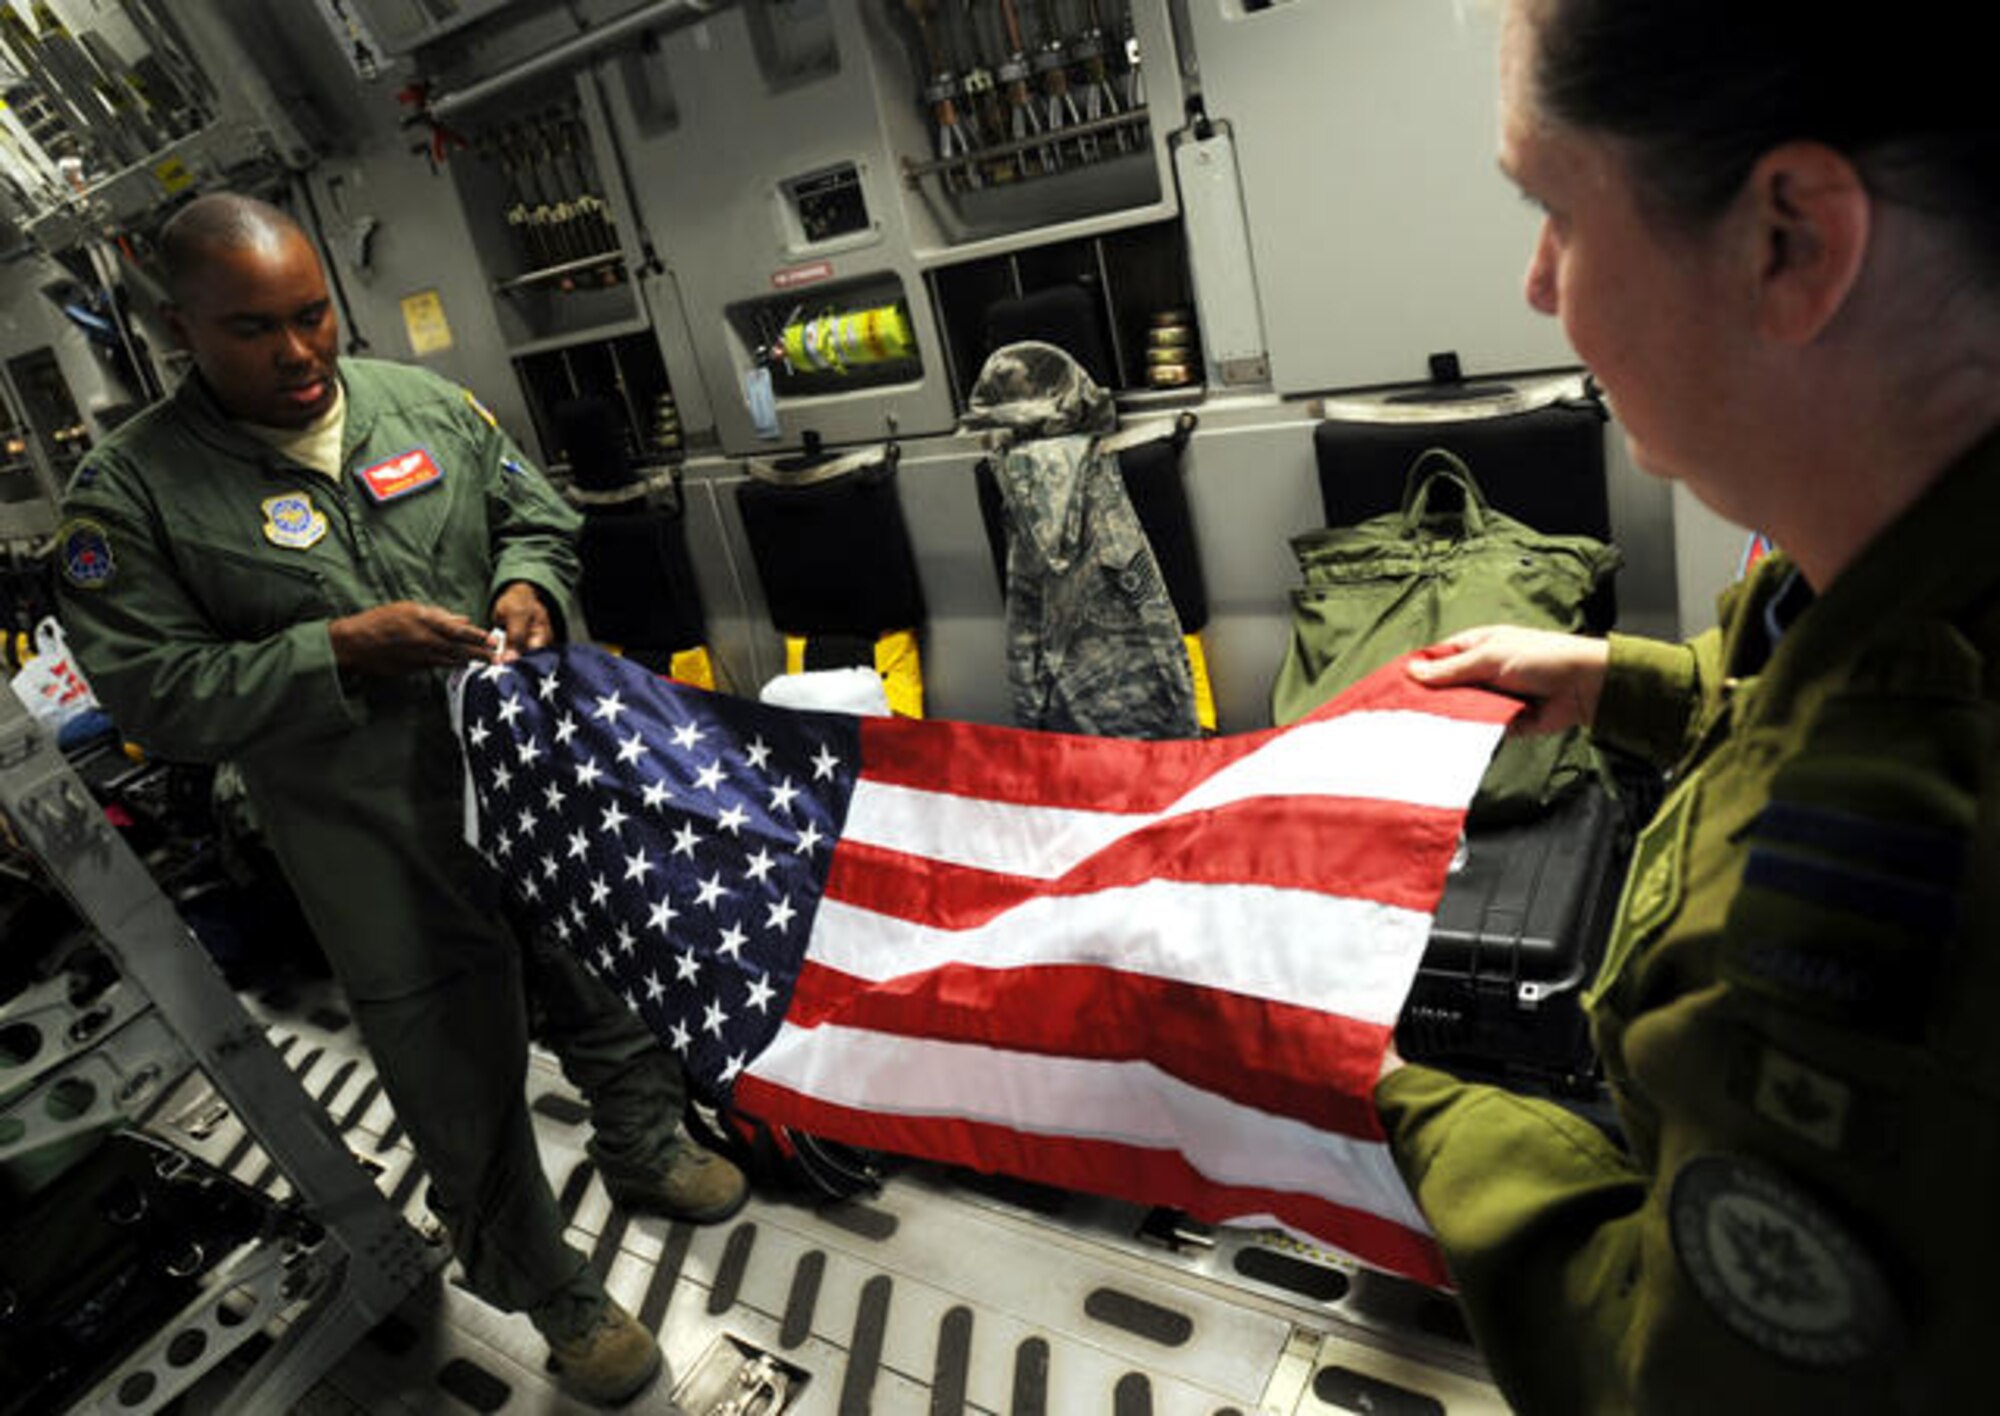 U.S. Air Force Capts. Roderick Reid, center, and Carol Nicholson, both flight nurses from the 775th Expeditionary Aeromedical Evacuation Flight, fold an American flag on a C-17A Globemaster III aircraft June 20, 2010, at Naval Air Station North Island, Calif., during the weekly Integrated Continental United States Medical Operations Plan mission. Service members who participate in the mission pick up war wounded and other patients at Andrews Air Force Base, Calif., and return them to their homes throughout the United States. (U.S. Air Force photo by Master Sgt. Rick Sforza/Released)